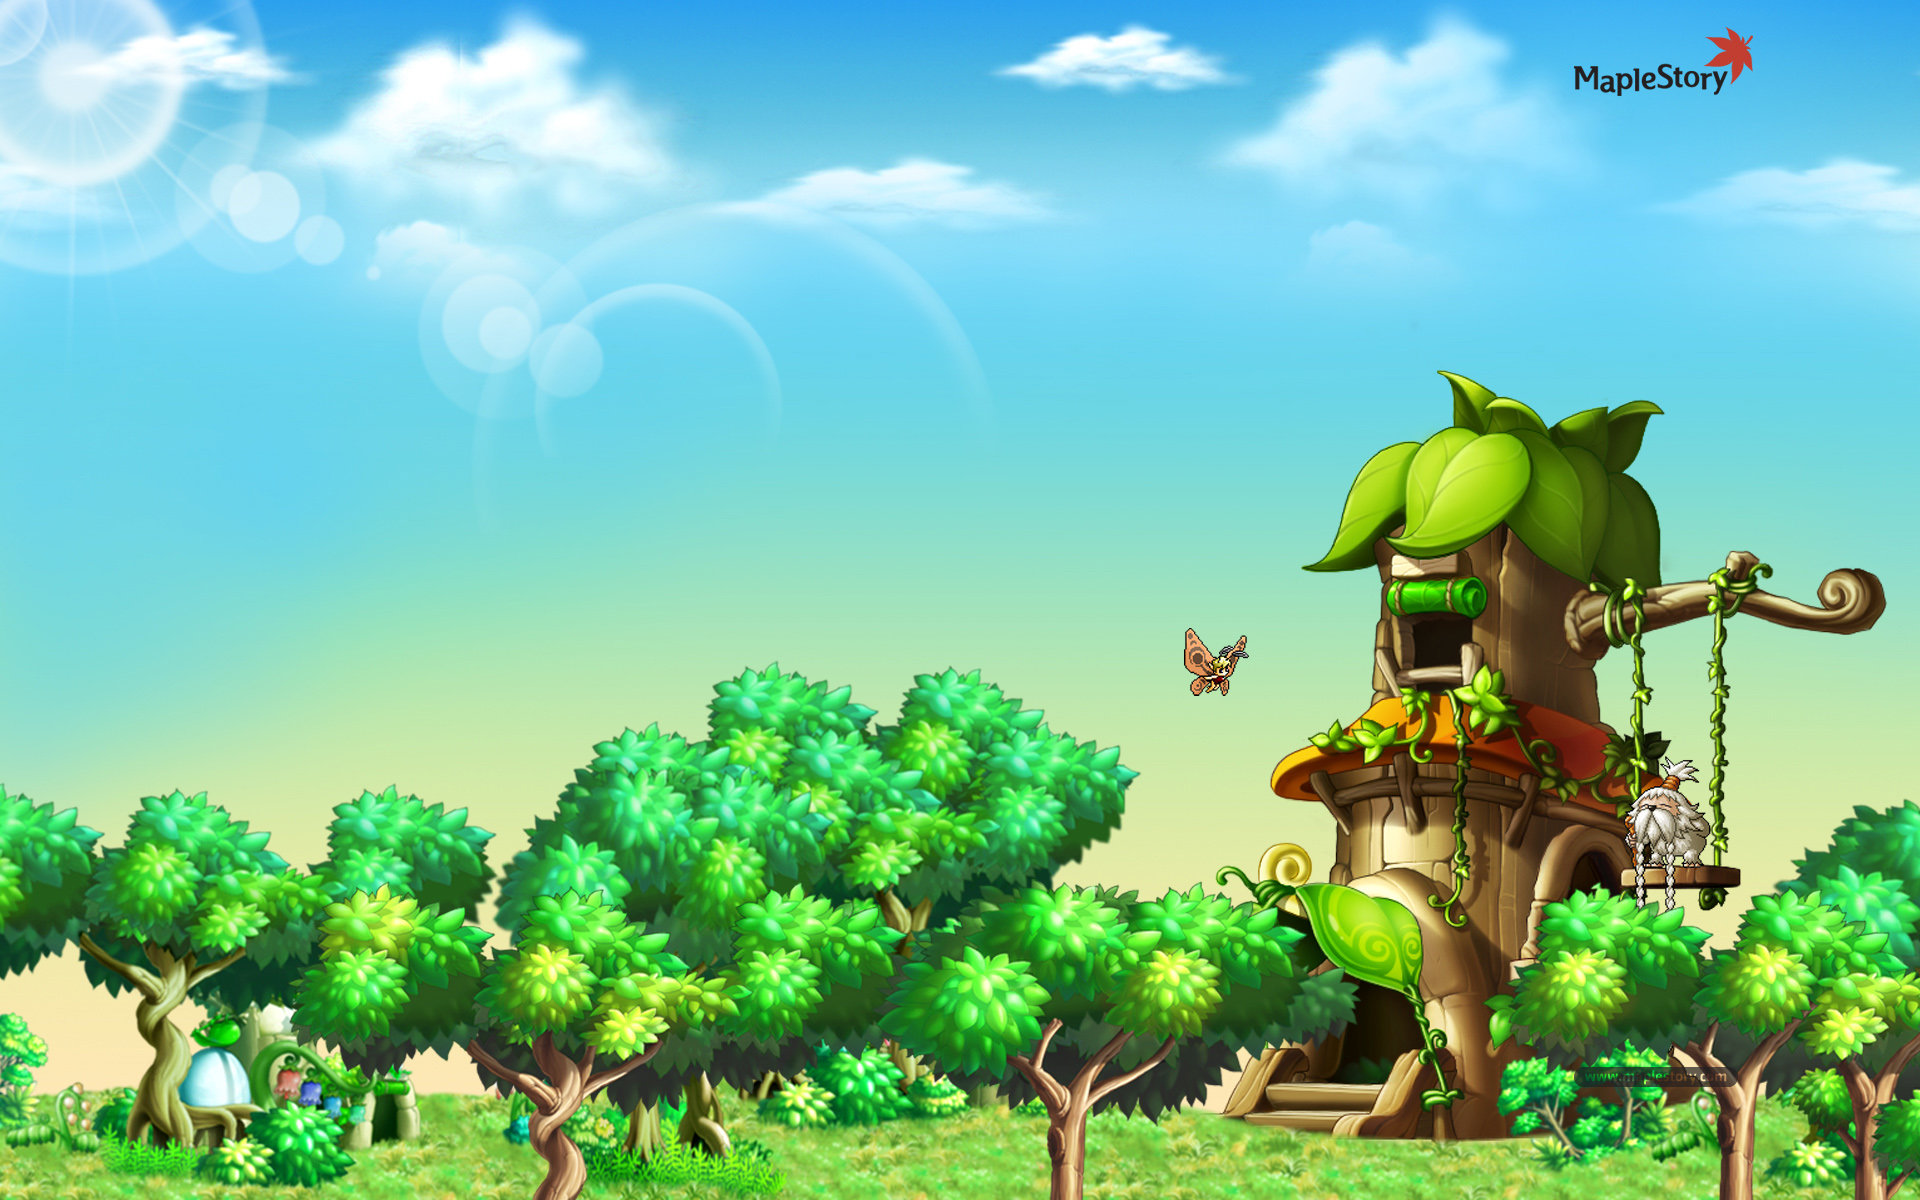 Download hd 1920x1200 Maplestory desktop background ID:34628 for free